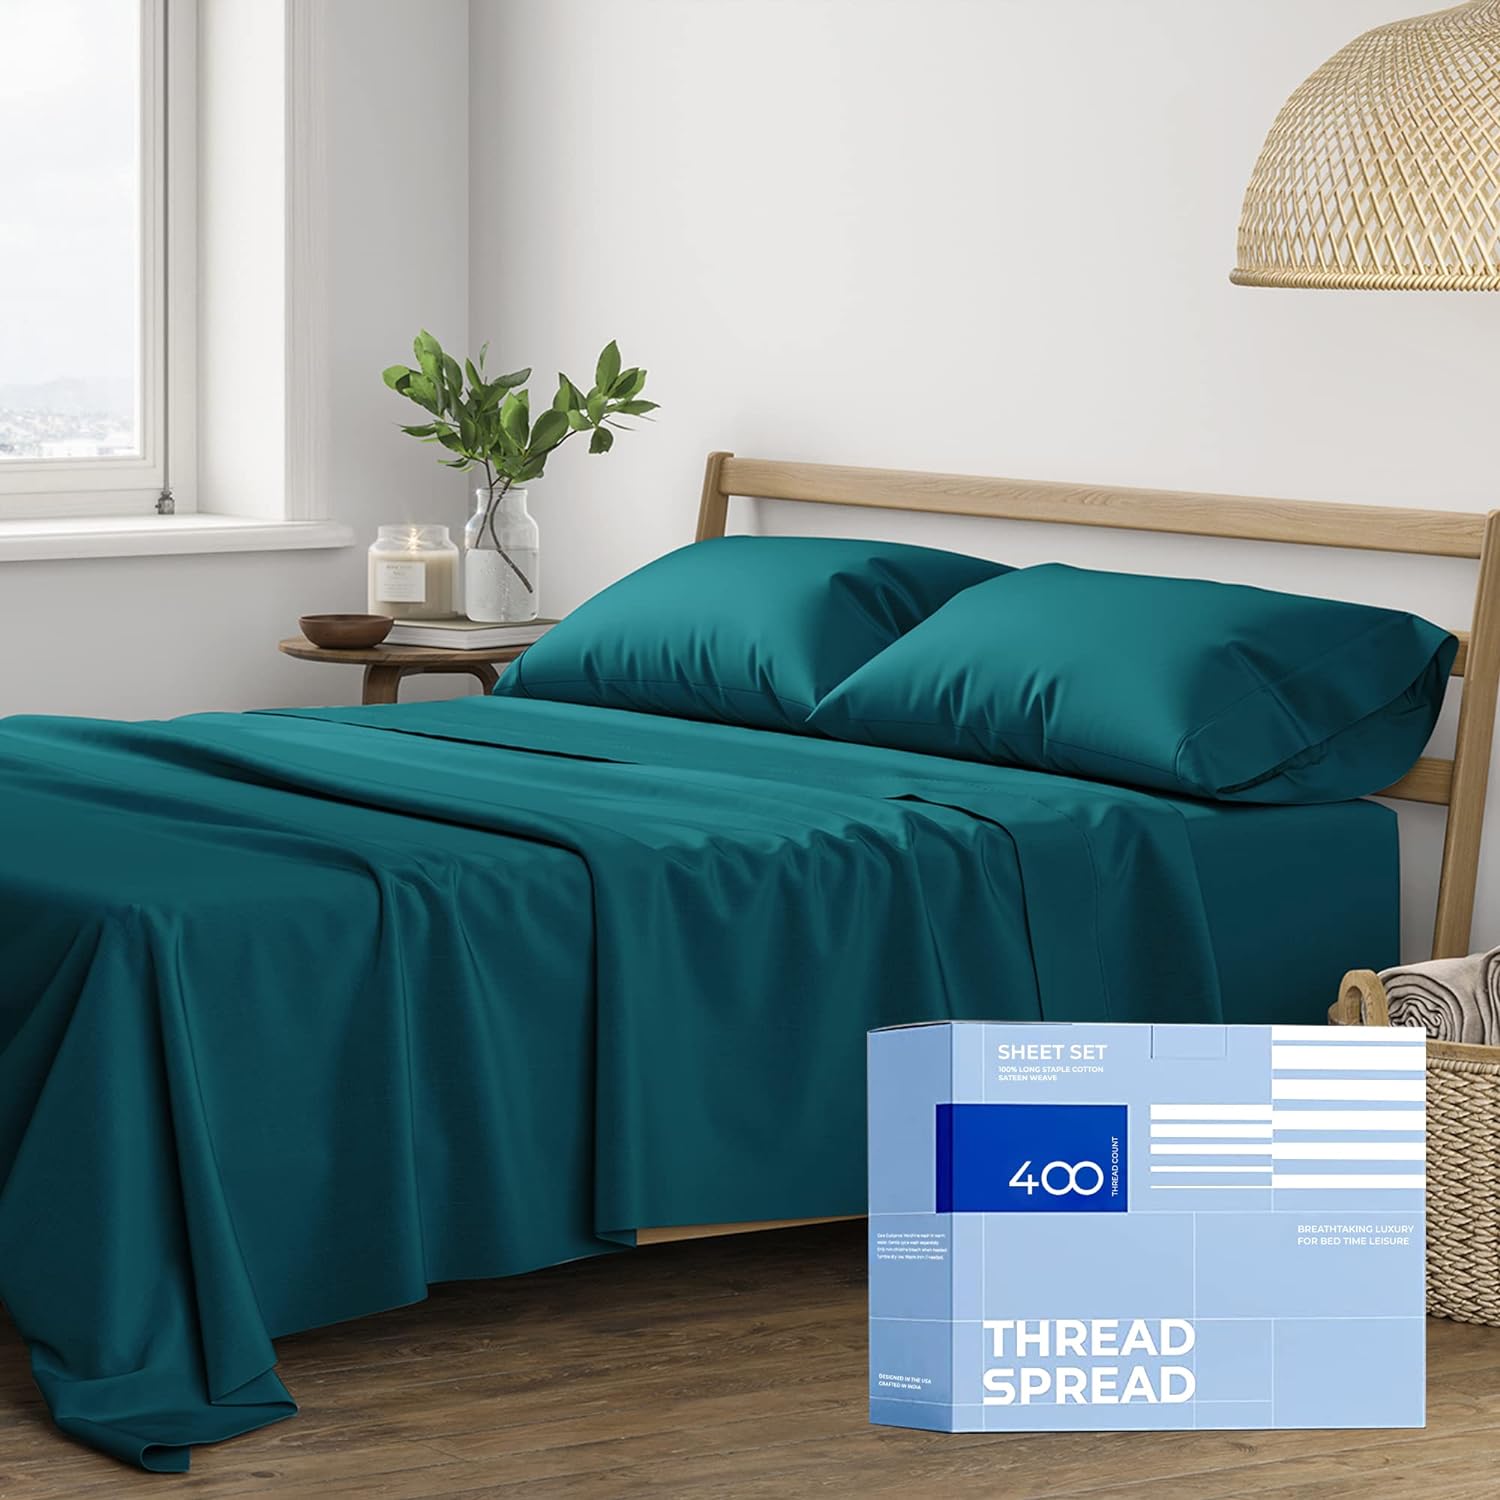 THREAD SPREAD 100% Cotton Sheets for Queen Size Bed - 400 Thread Count 4 Piece Cotton Sheet Set - Ultra Soft, Breathable Cooling Sheets - Deep Pocket Queen Bed Sheets - Sateen Weave Bedsheet (Teal)